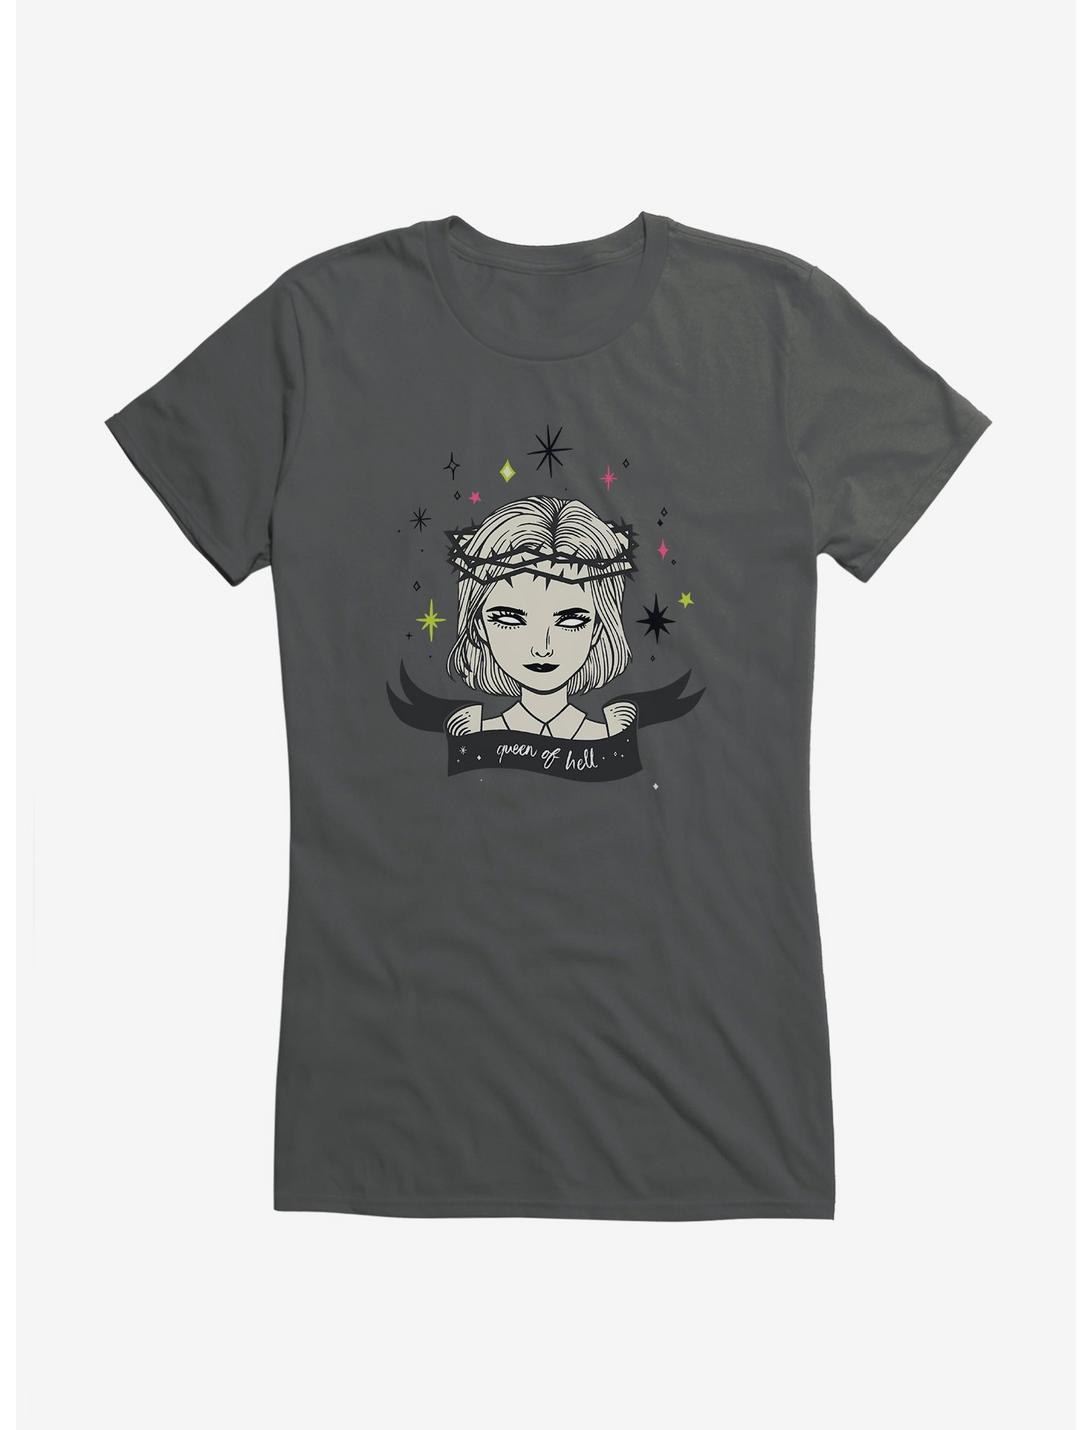 Chilling Adventures Of Sabrina Queen Of Hell Girls T-Shirt, , hi-res